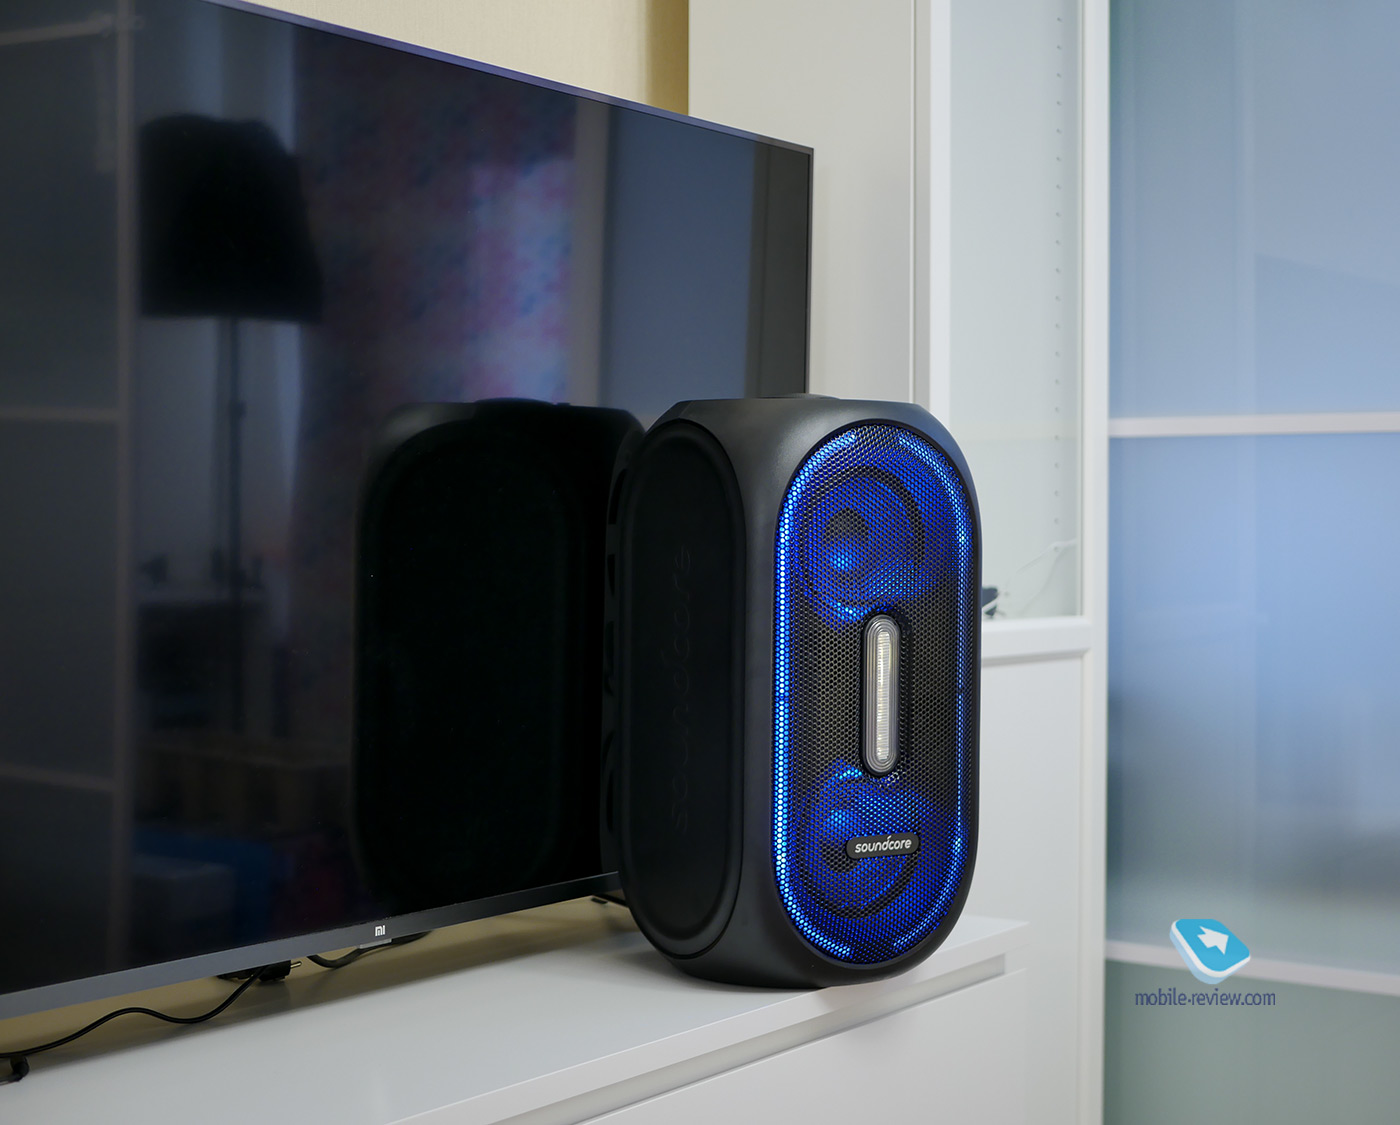 Anker Soundcore Rave speaker review - when you want it louder!